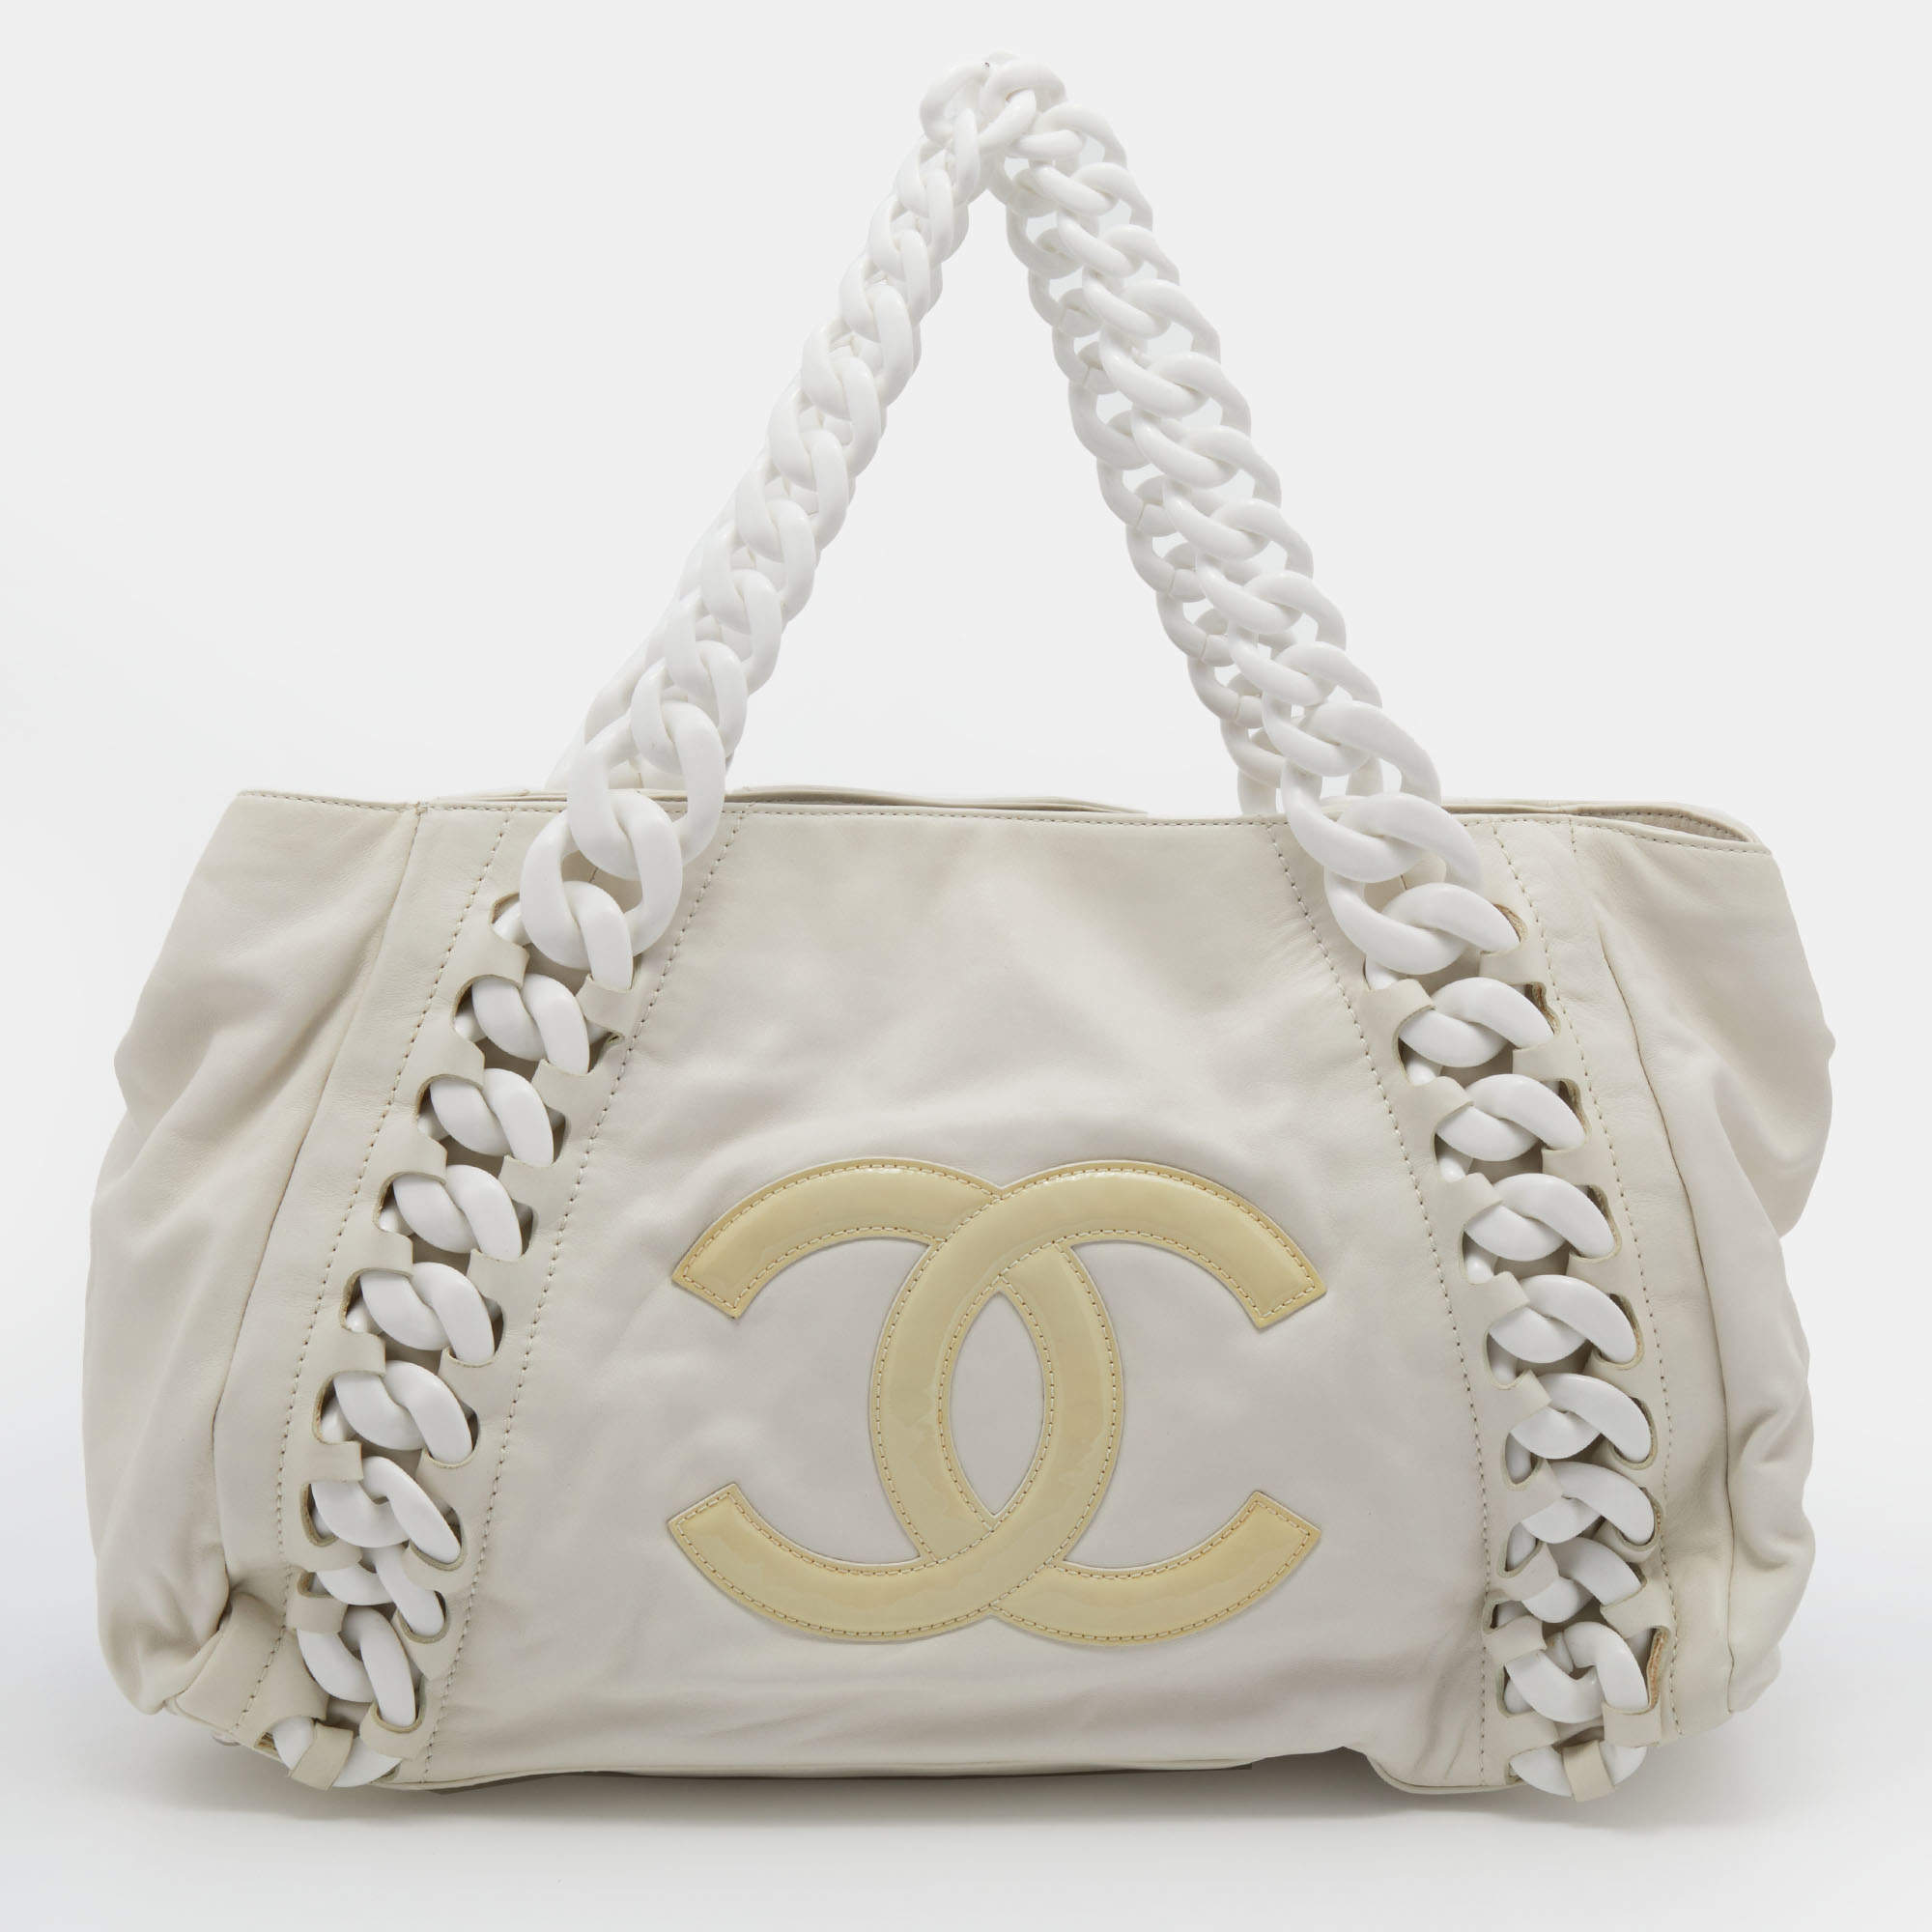 Chanel Black Leather Modern Chain Rhodoid East West Tote Chanel